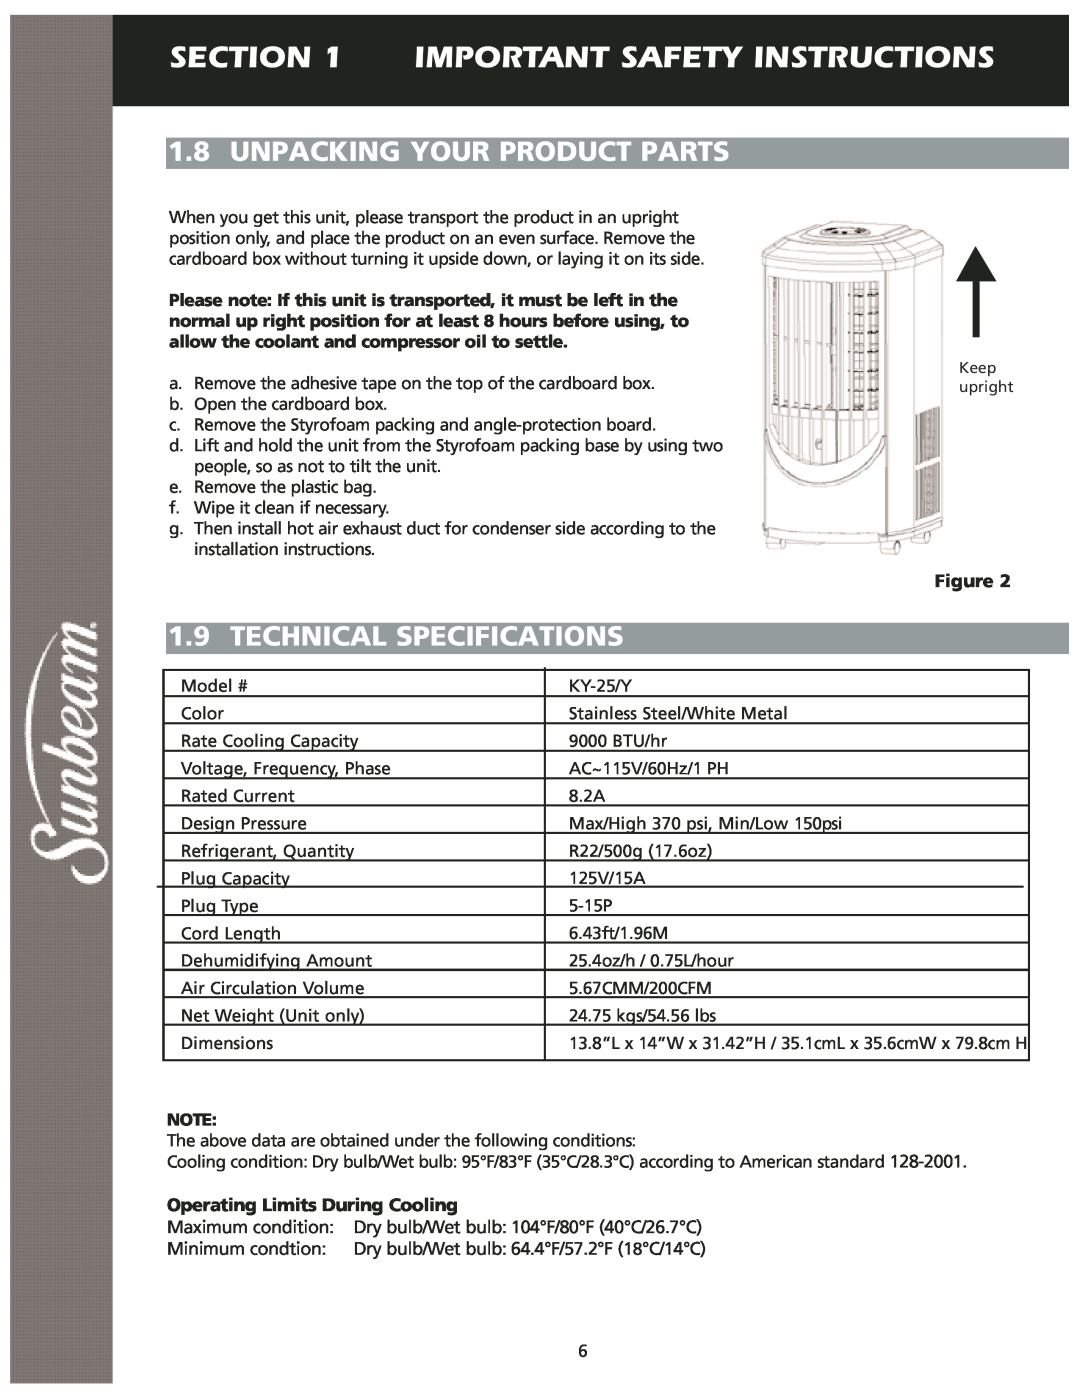 Sunbeam KY-25 user manual Unpacking Your Product Parts, Technical Specifications, Important Safety Instructions 